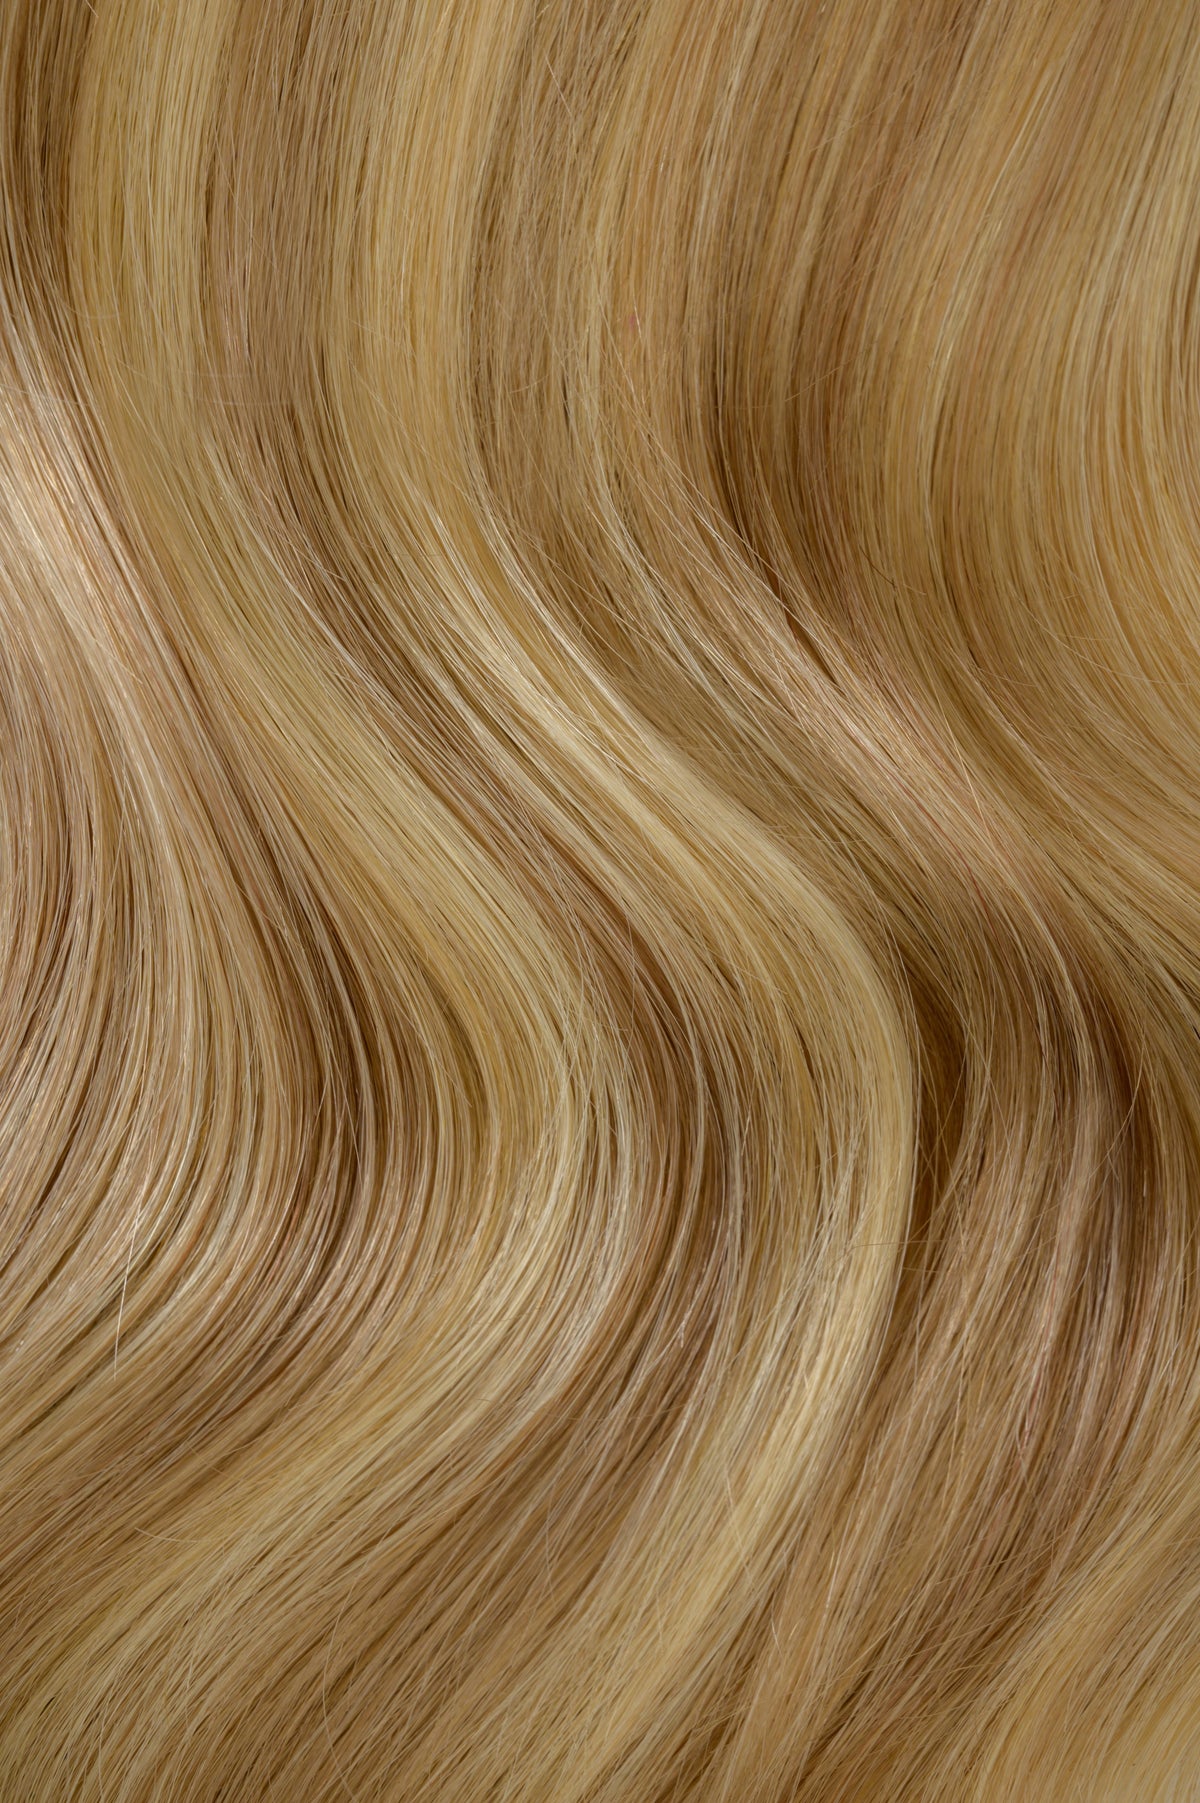 #16/22 Caramel Light Blonde Mix Traditional Weft Extensions